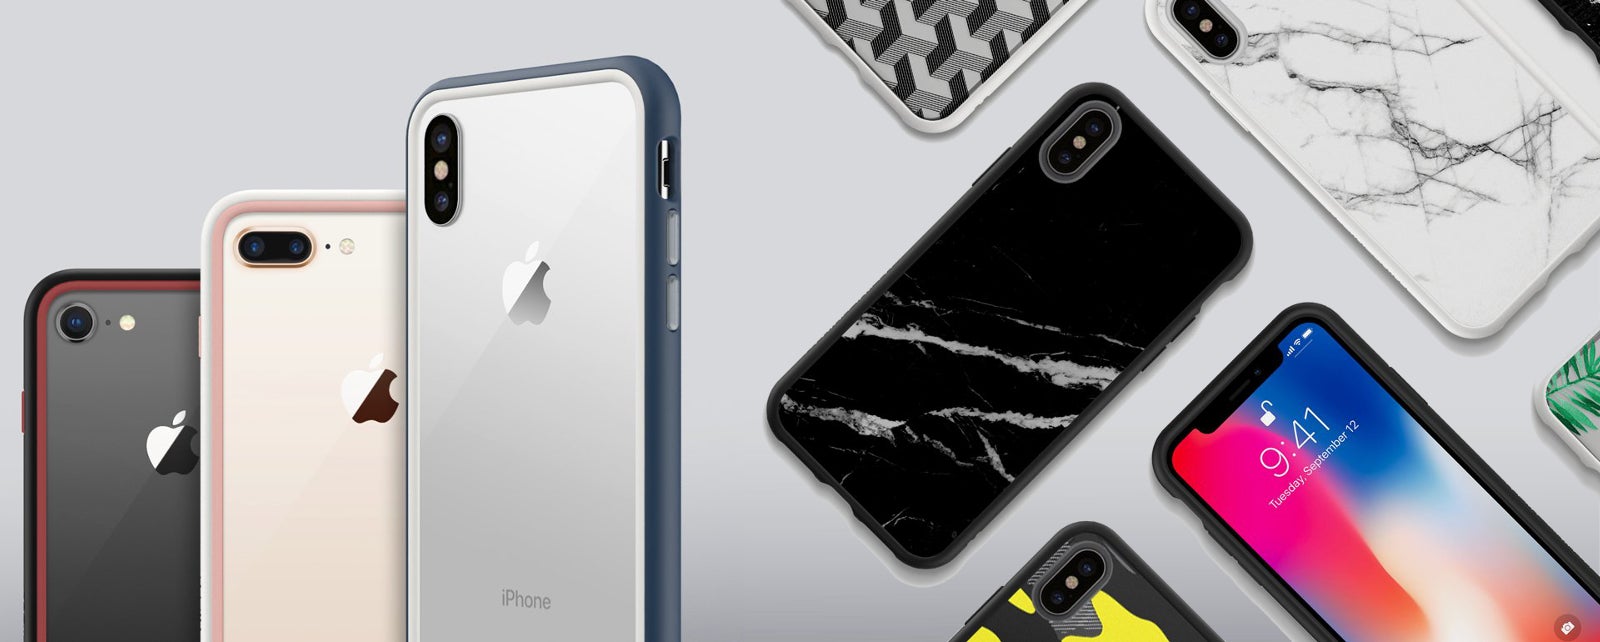 iPhone X bumper cases: protect your device, don't hide its style